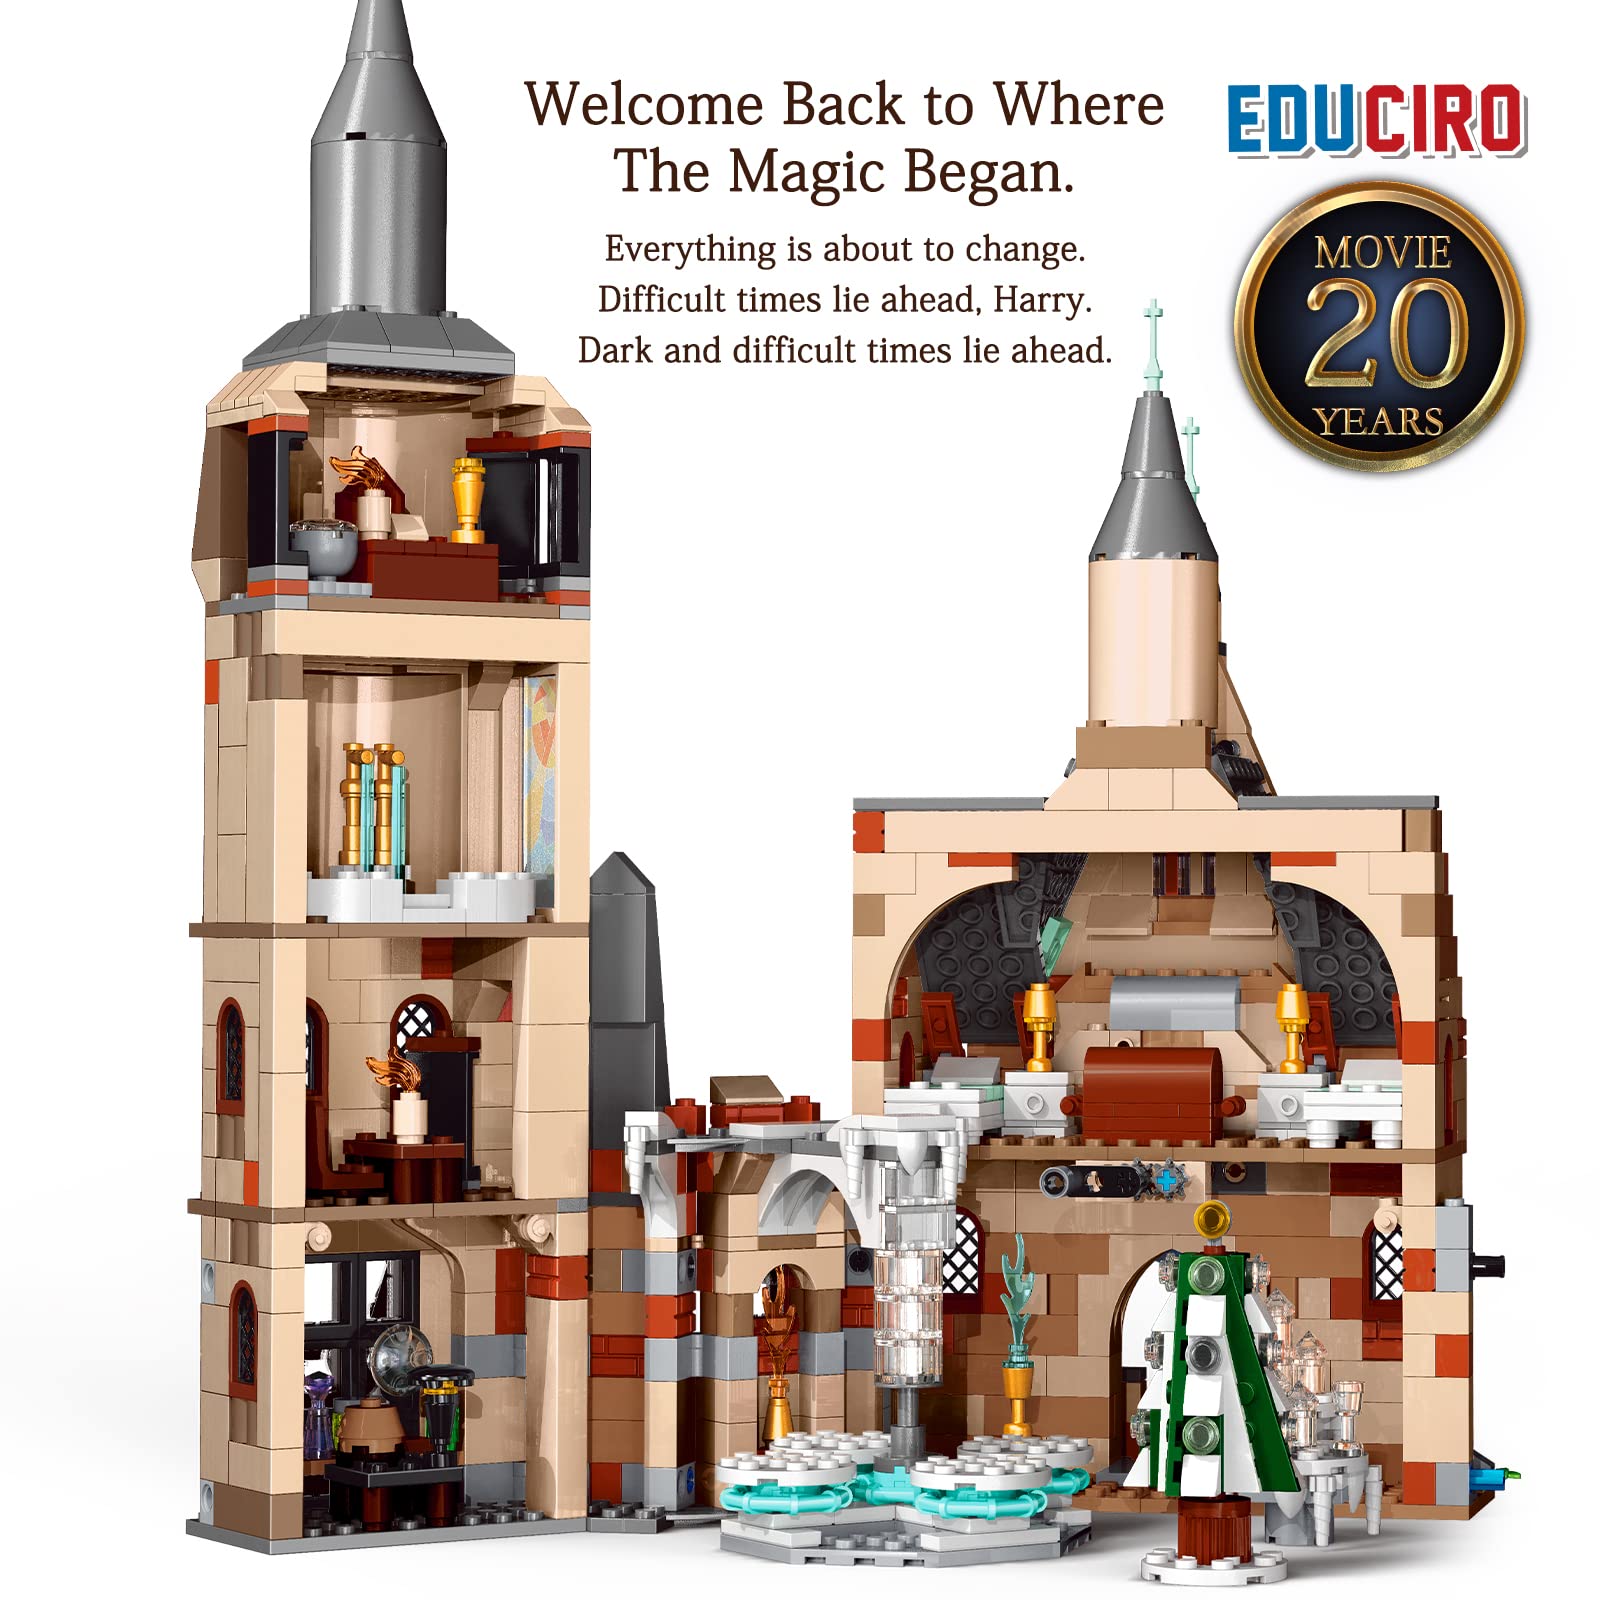 Educiro Harry Clock Tower and Great Hall Castle (871 Pieces), Build and Play Dumbledore Office Building Toy Set for Kids, Boys, Girls Ages 8-14, Not Lego Harry Potter